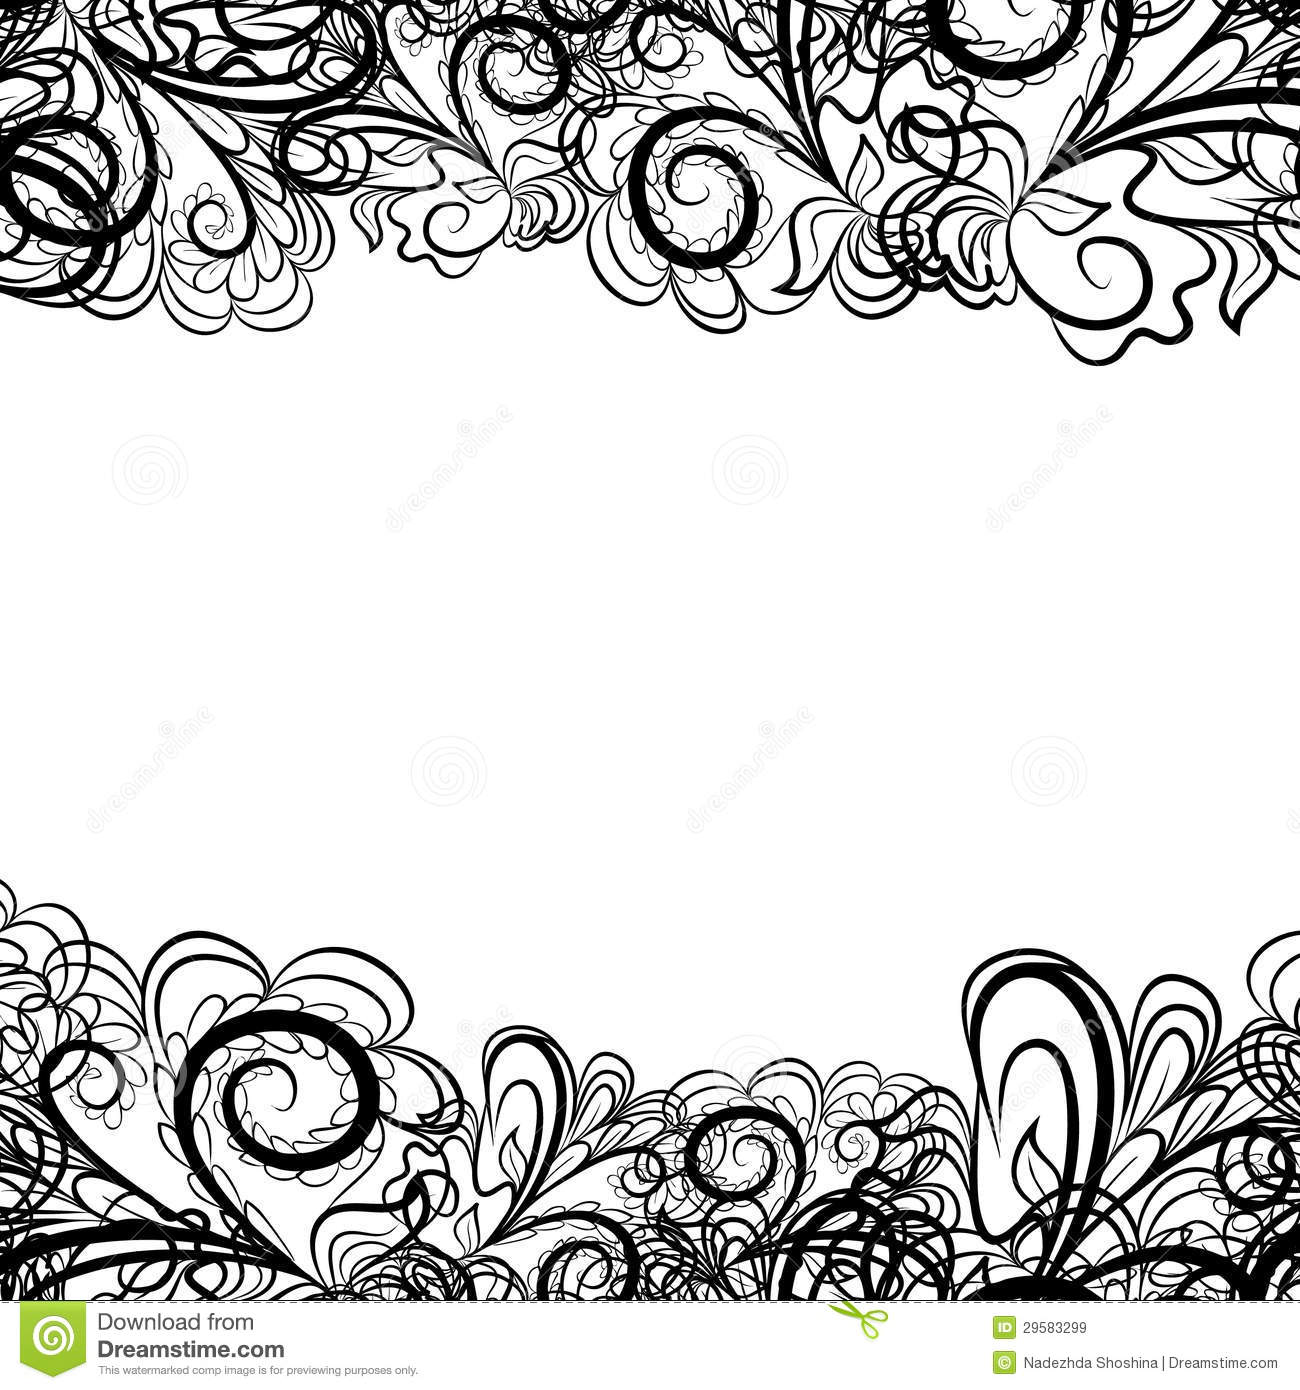 White Lace Border Clipartblack Lace Border Royalty Free Stock Images